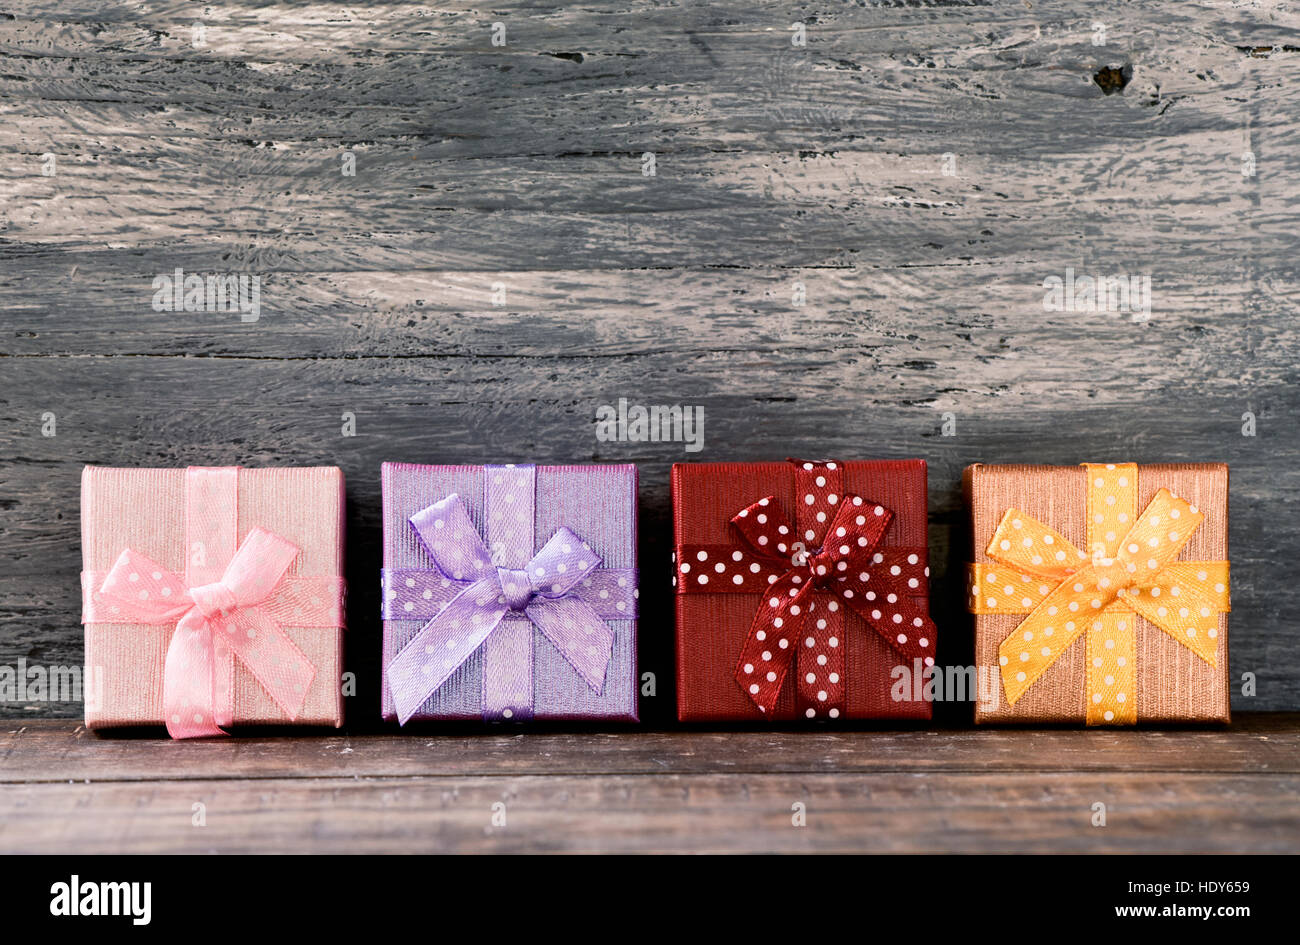 some cozy gifts wrapped in different papers and tied with ribbons of different colors arranged in line on a rustic wooden surface, with a negative spa Stock Photo